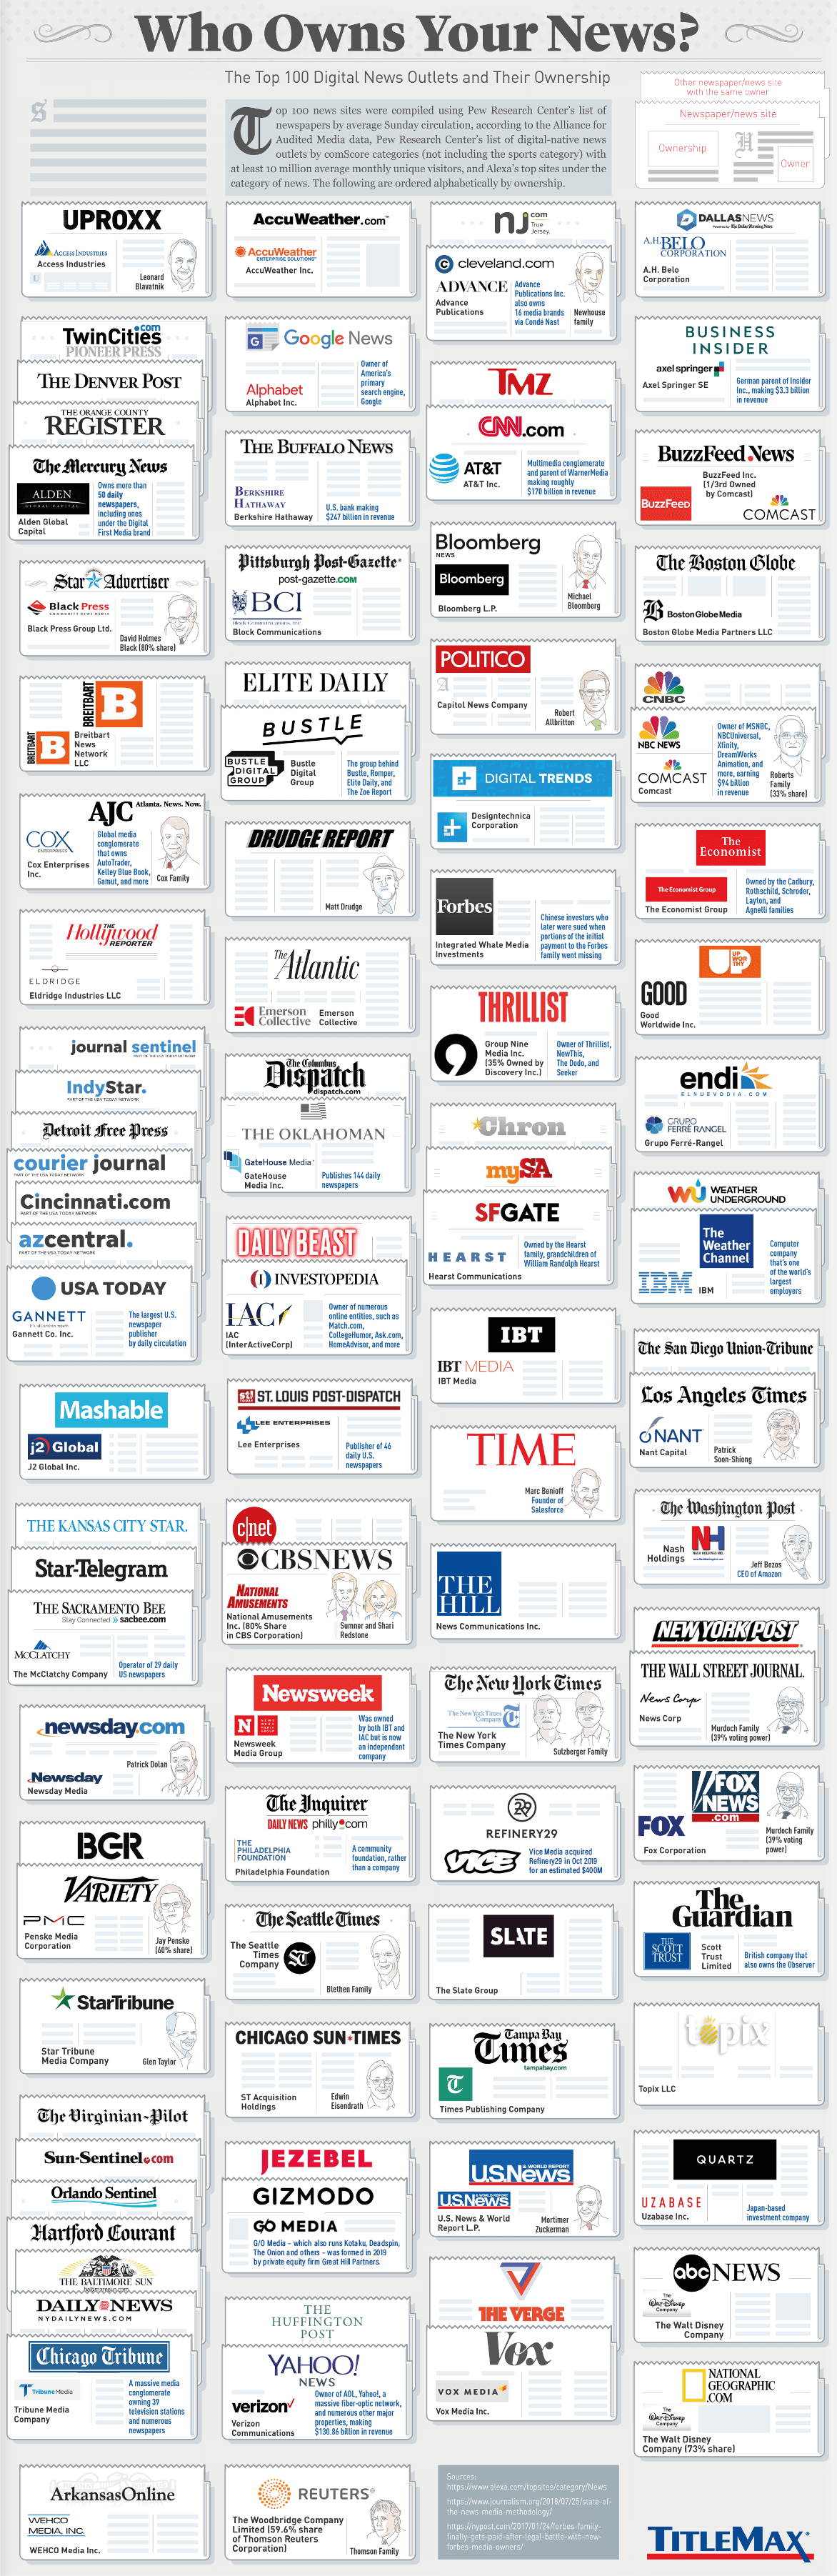 Who Owns Your Favorite News Media Outlet?